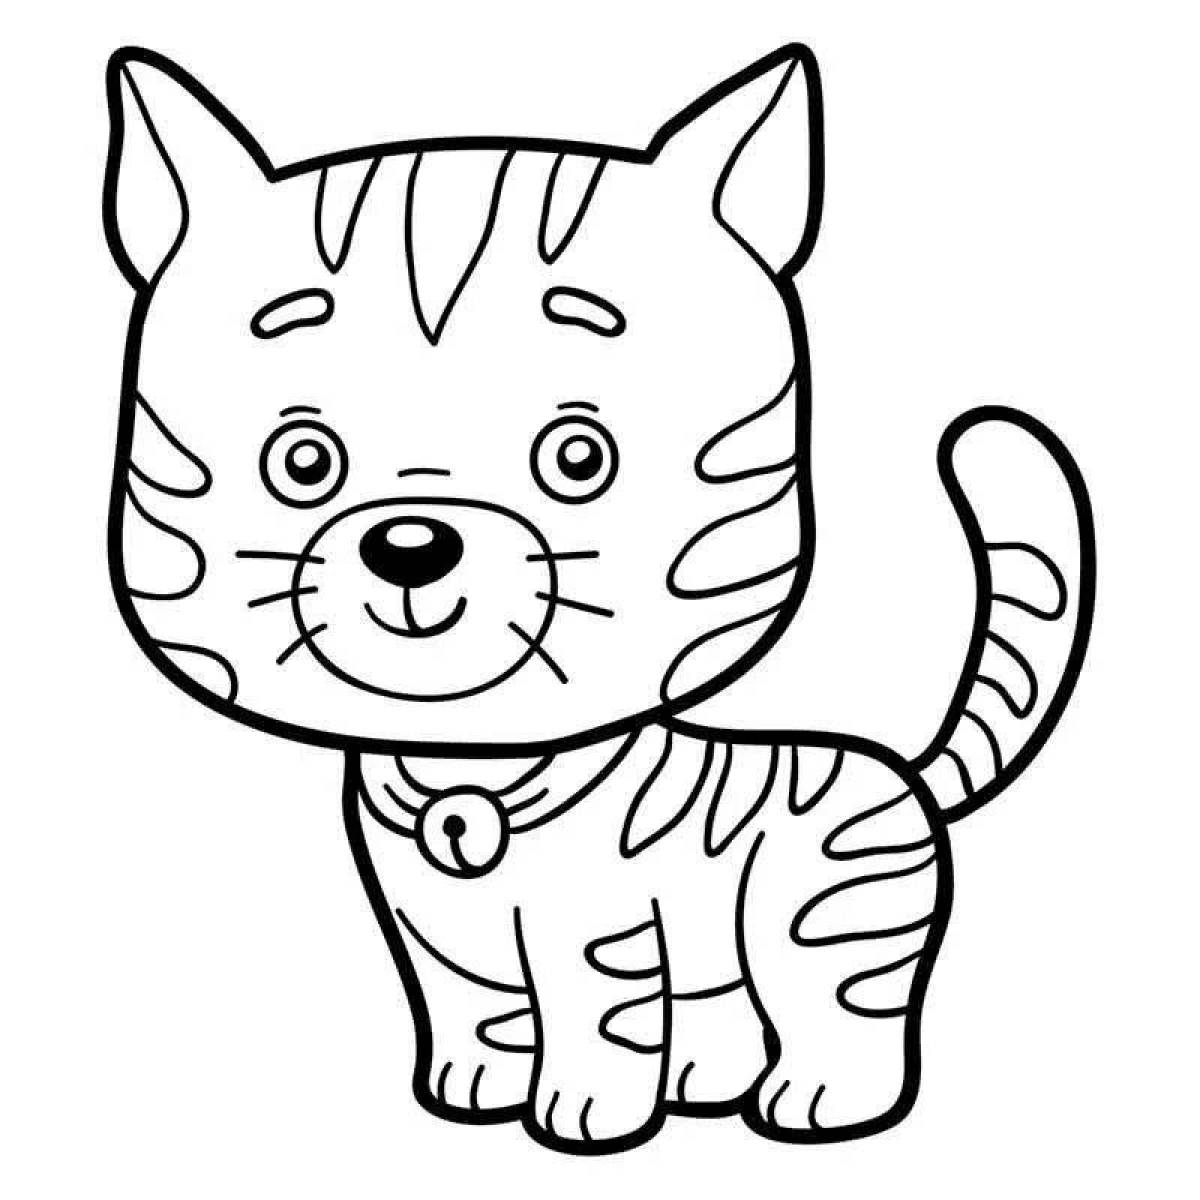 Adorable Booboo Kitten Coloring Page